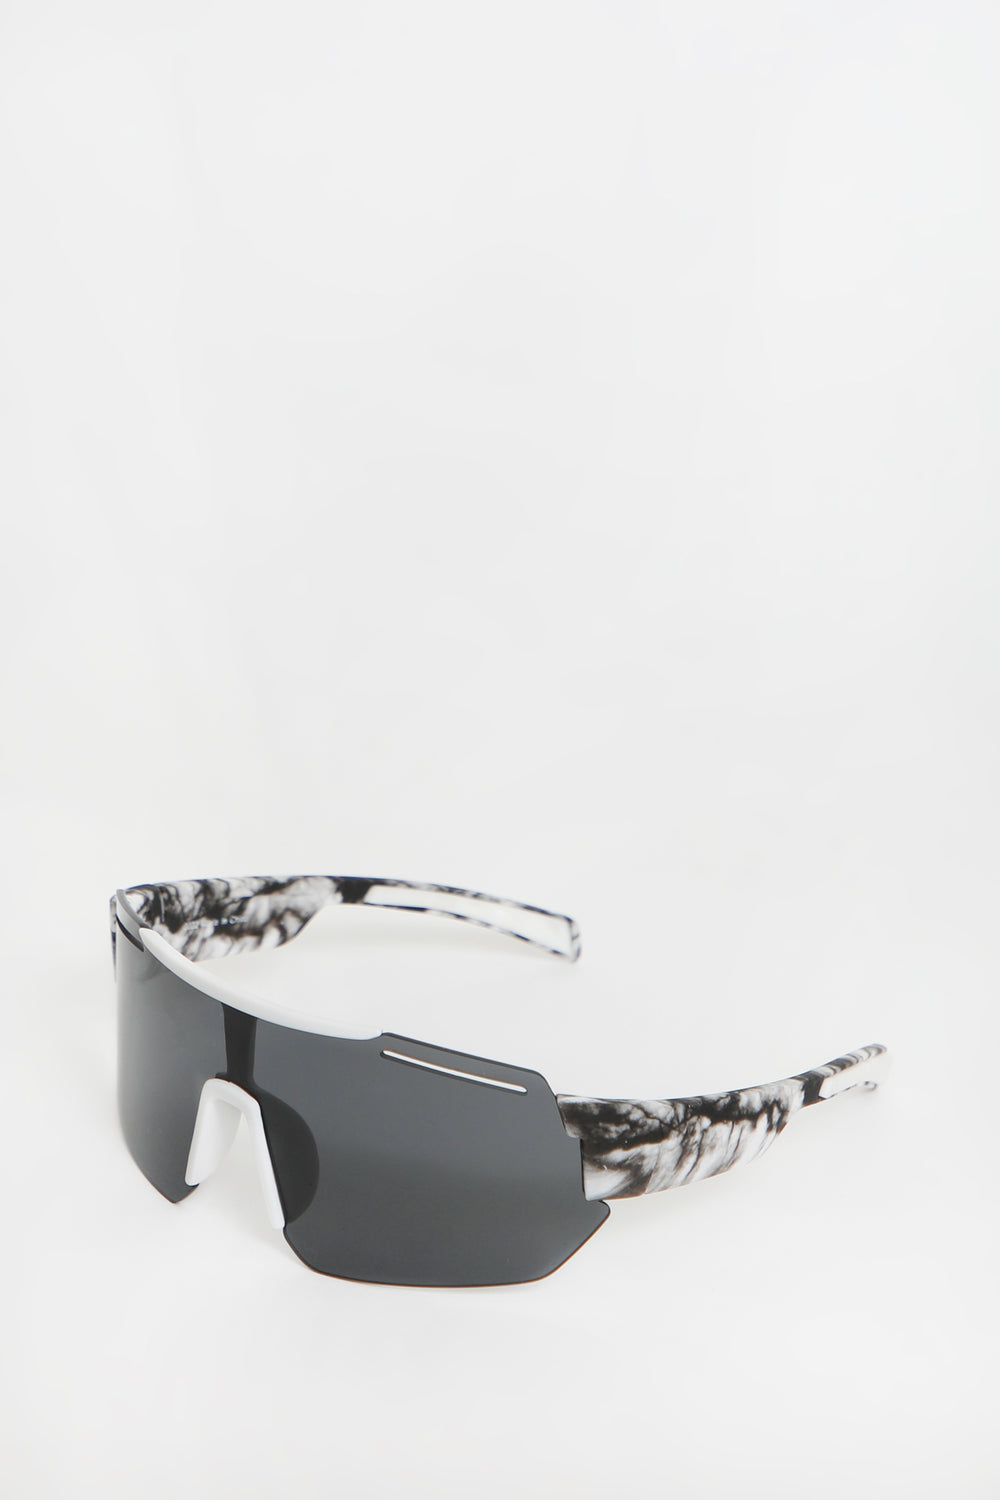 West49 Marble Shield Sunglasses West49 Marble Shield Sunglasses